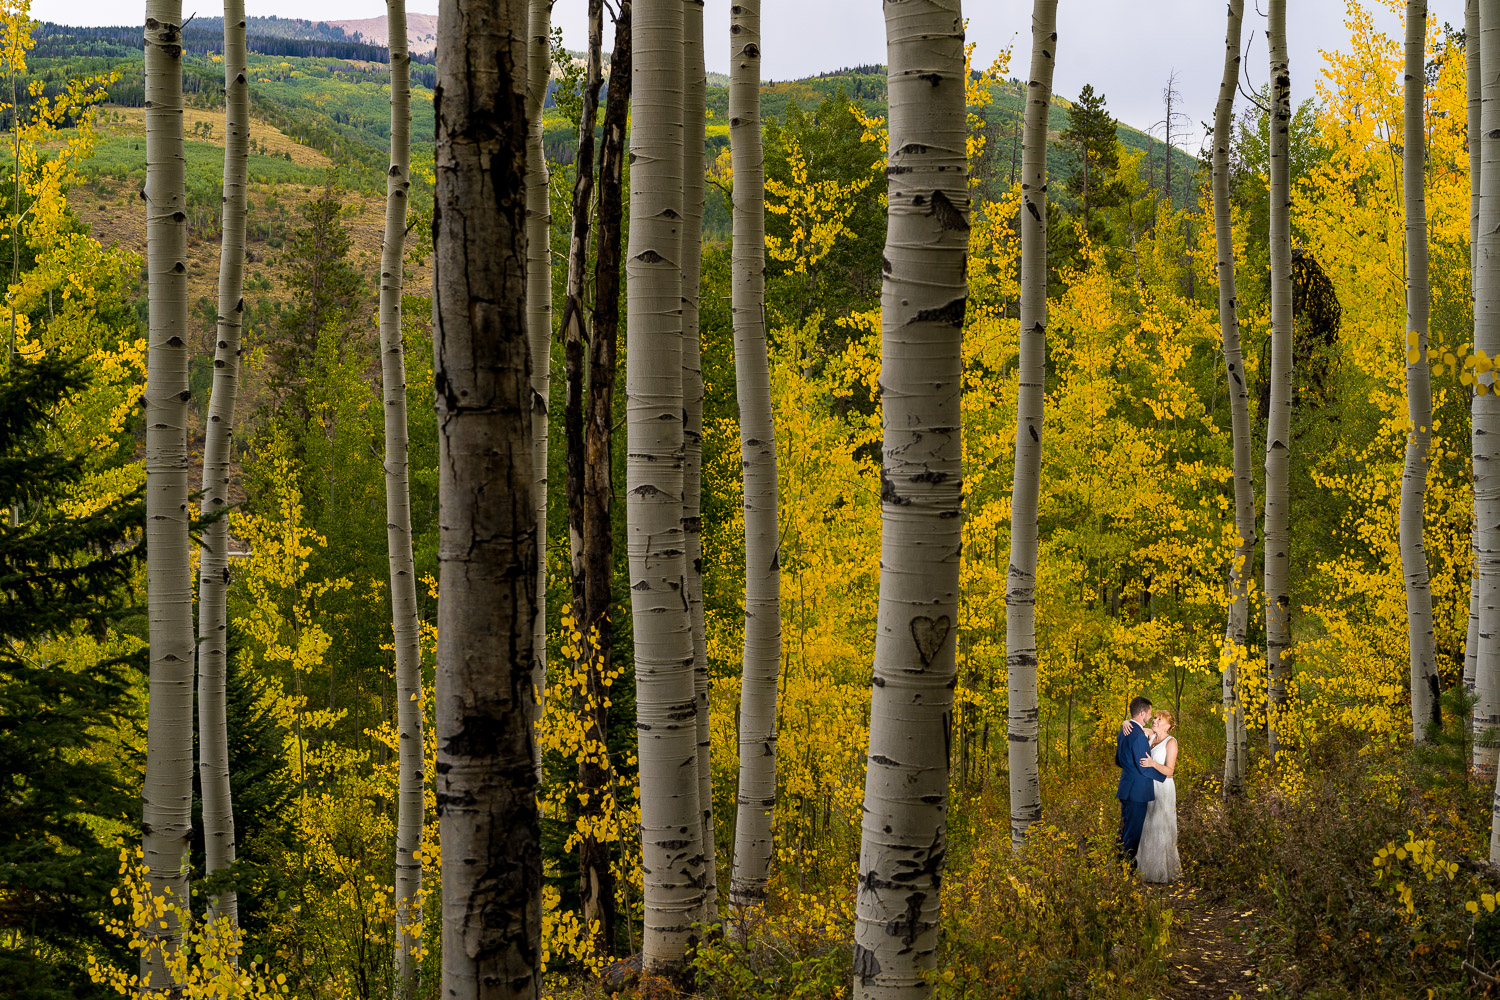 Vail Wedding Deck Fall Couple Portraits in Aspen Trees Fall Colors